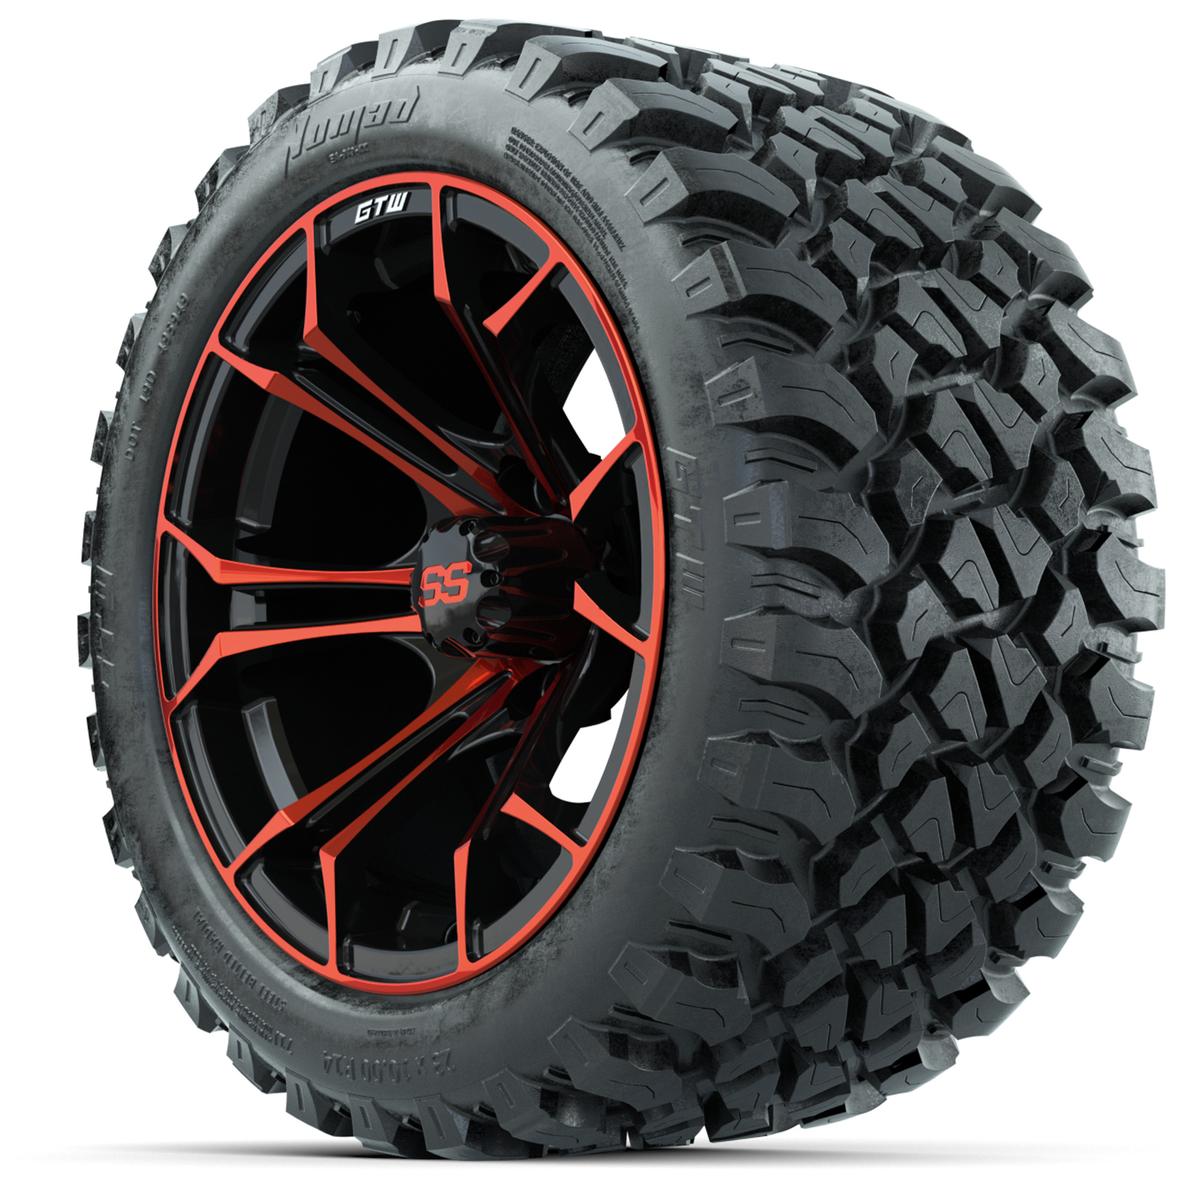 GTW Spyder Red/Black 14 in Wheels with 23x10-14 GTW Nomad All-Terrain Tires – Full Set